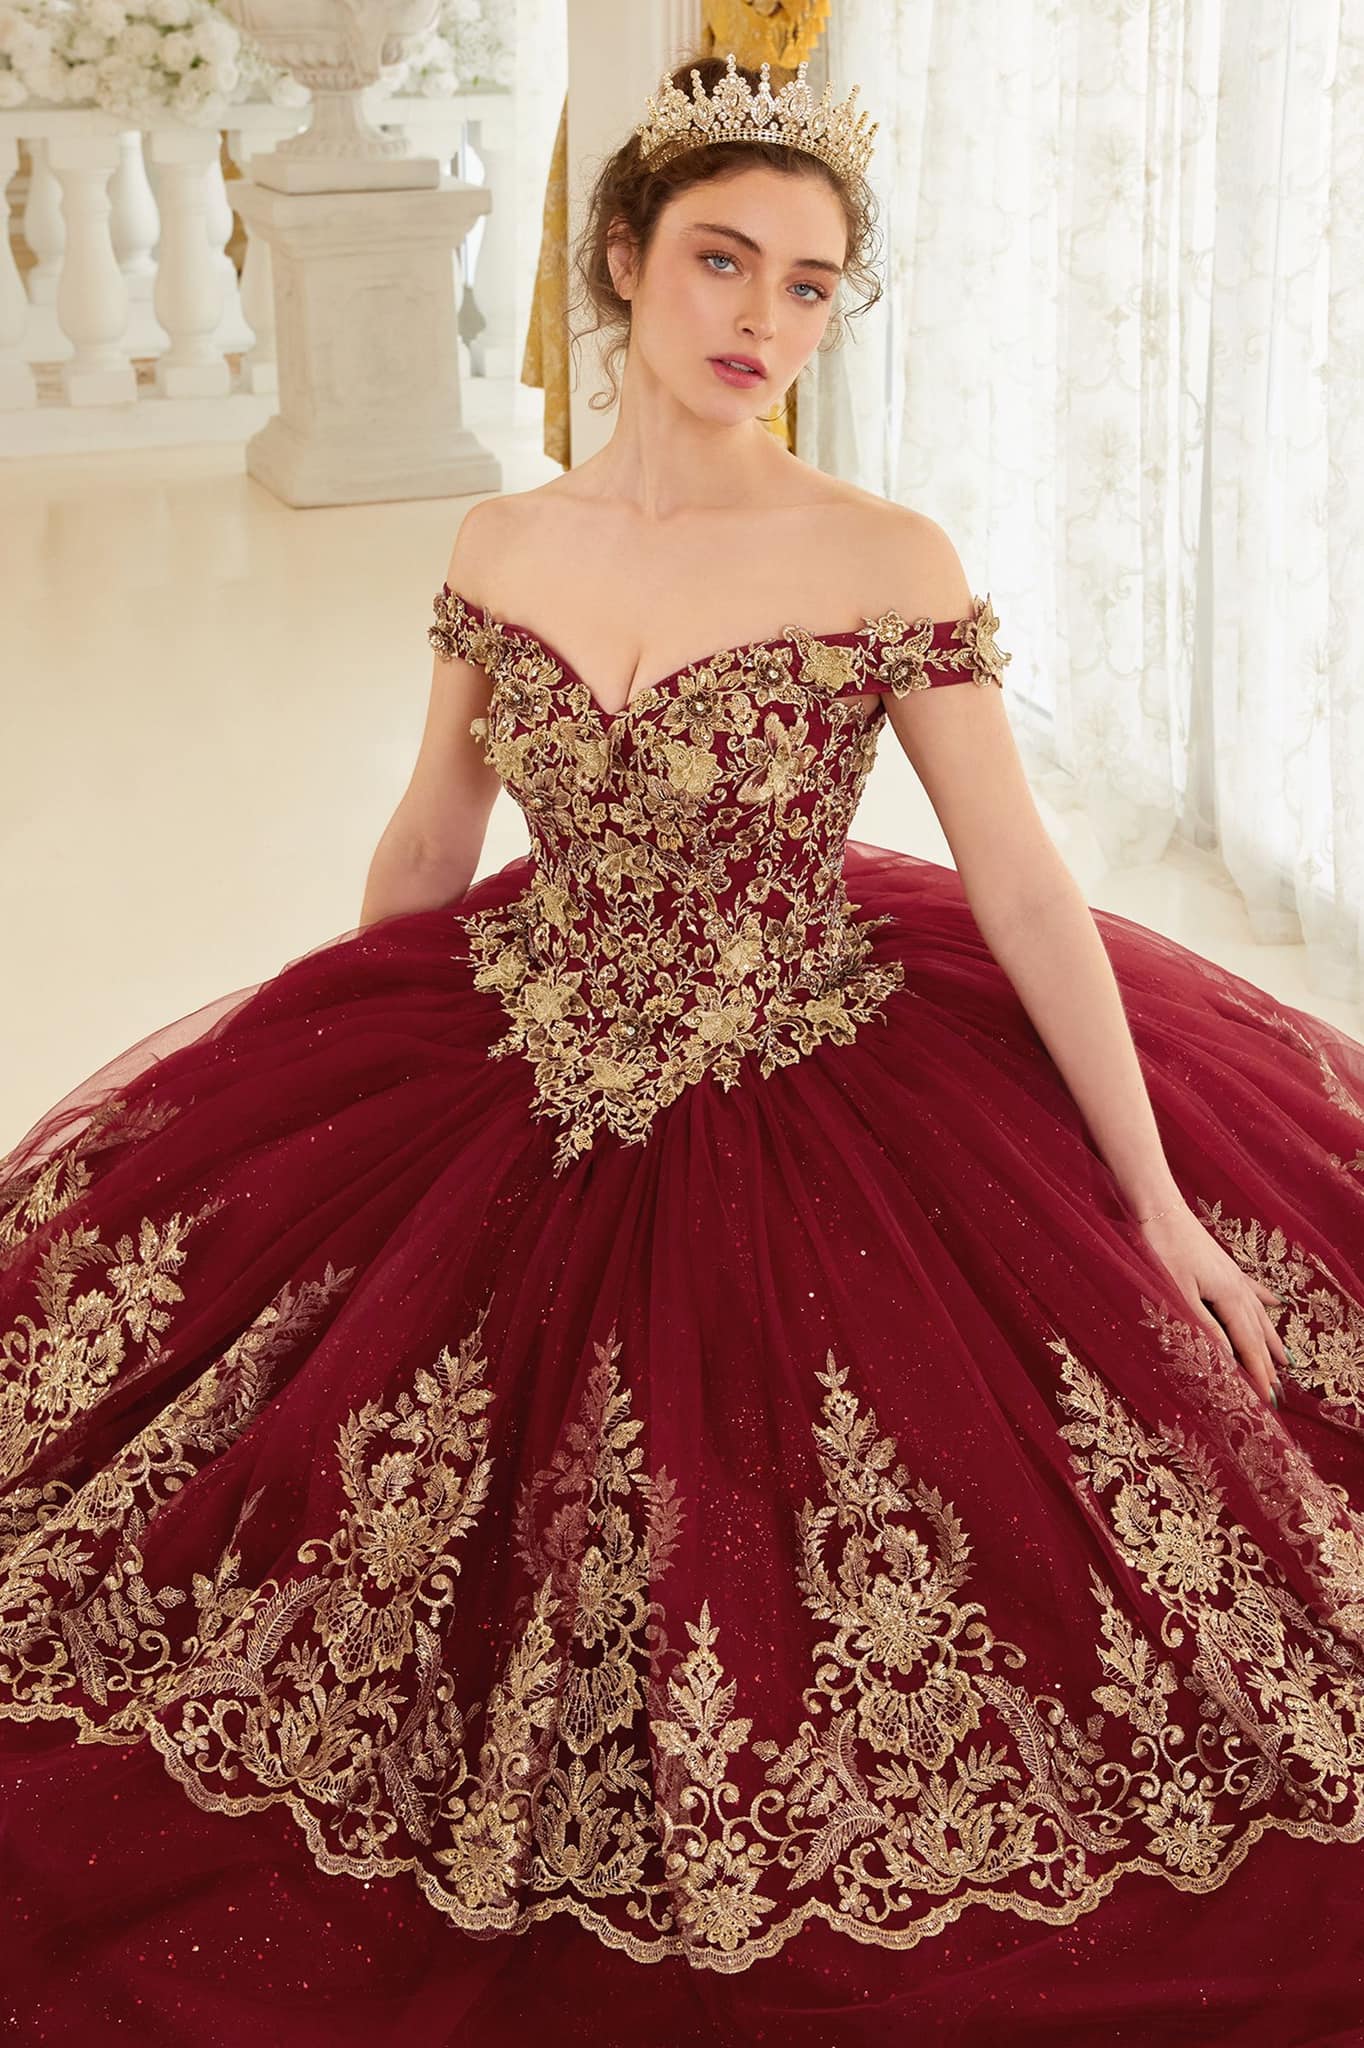 Burgundy Ball Gown Lace Quinceanera Dresses Beaded Appliqued Prom Gowns Off The Shoulder Neckline Sequined Tulle Sweet 15 Corset Masquerade Dress